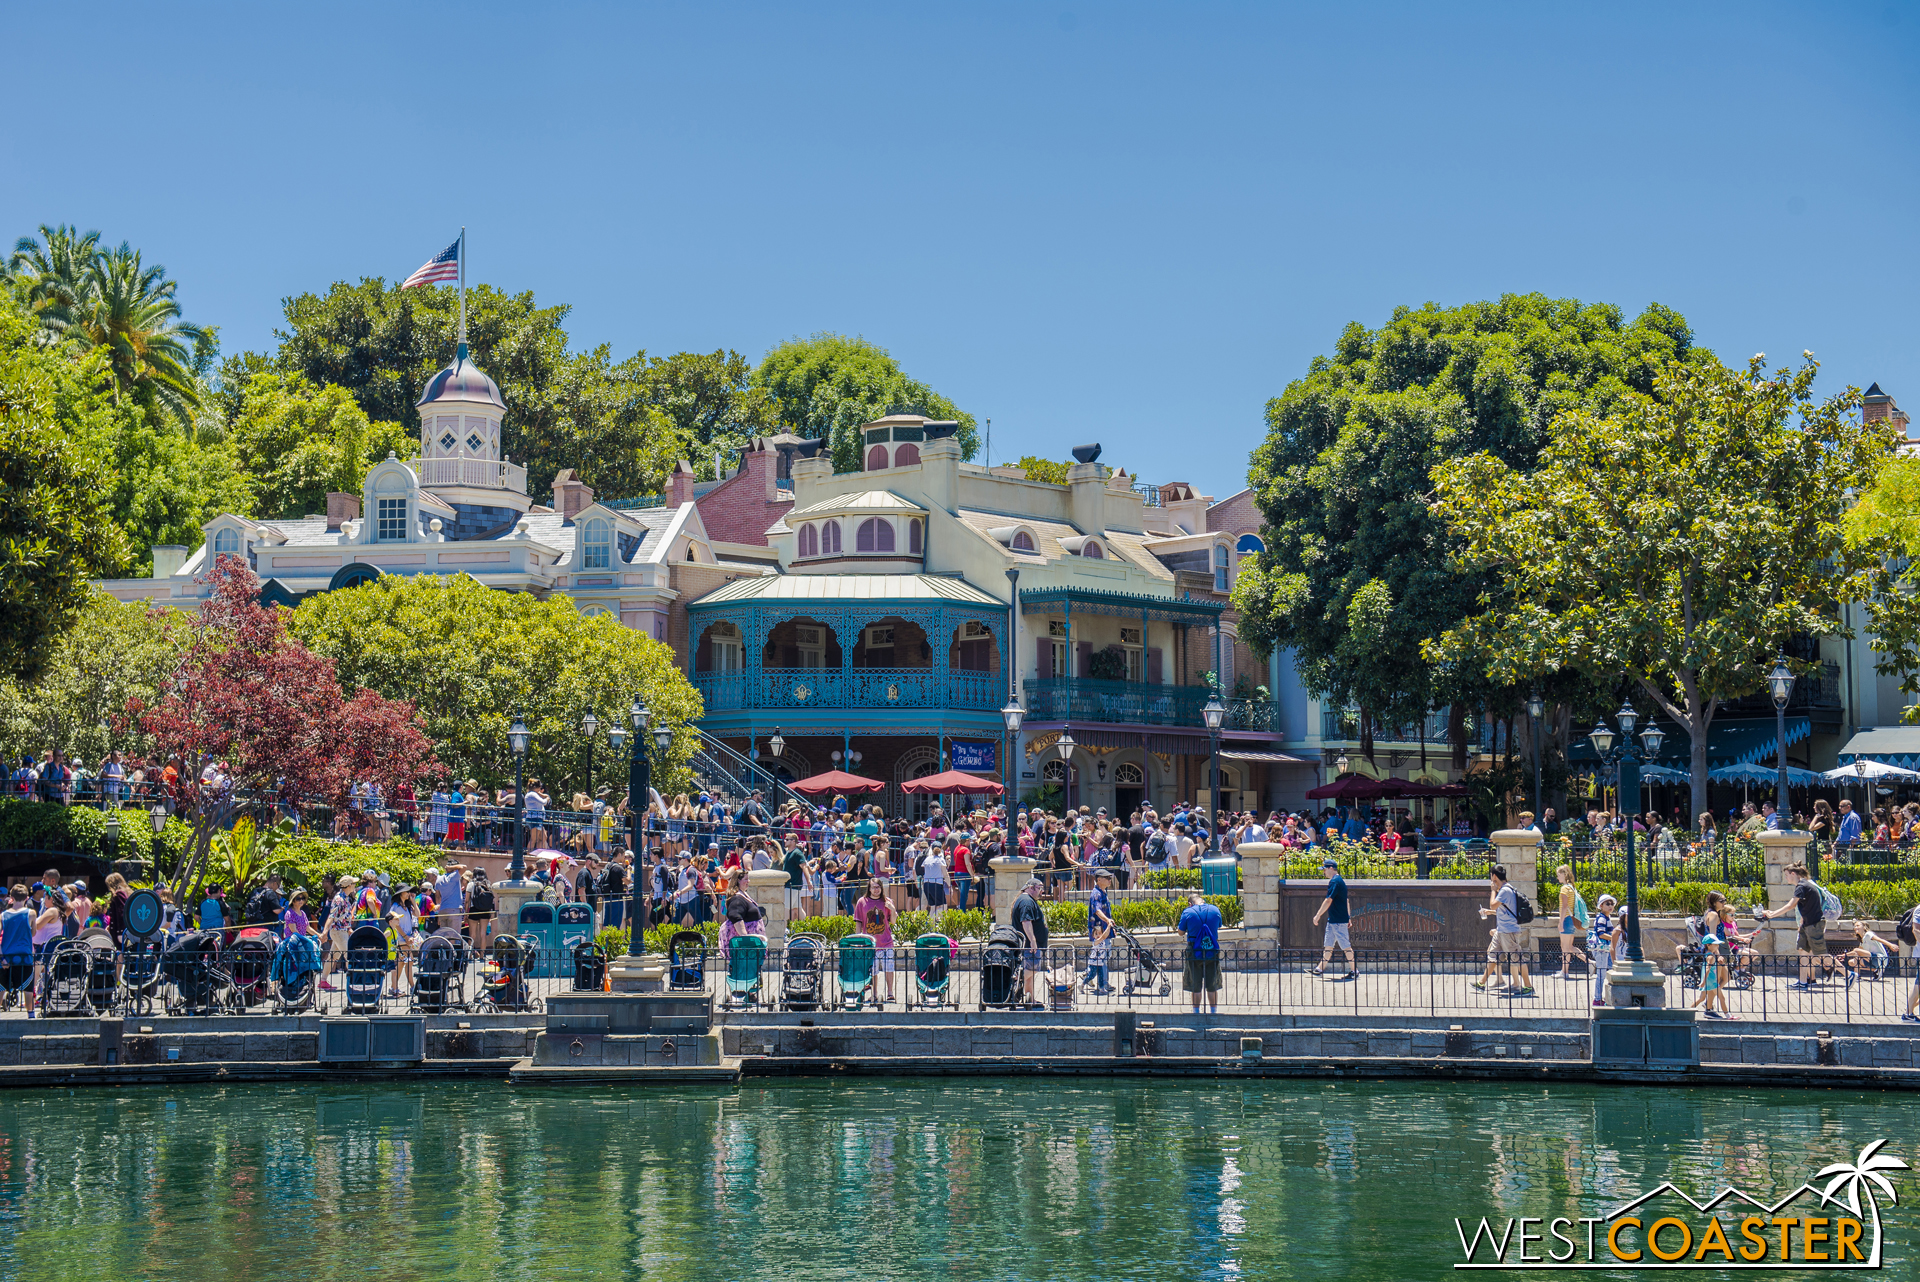  We'll end with a view people haven't been able to witness in a while.&nbsp; But it's great to have Tom Sawyer Island back!&nbsp; Another step toward the return to normalcy along the river! 